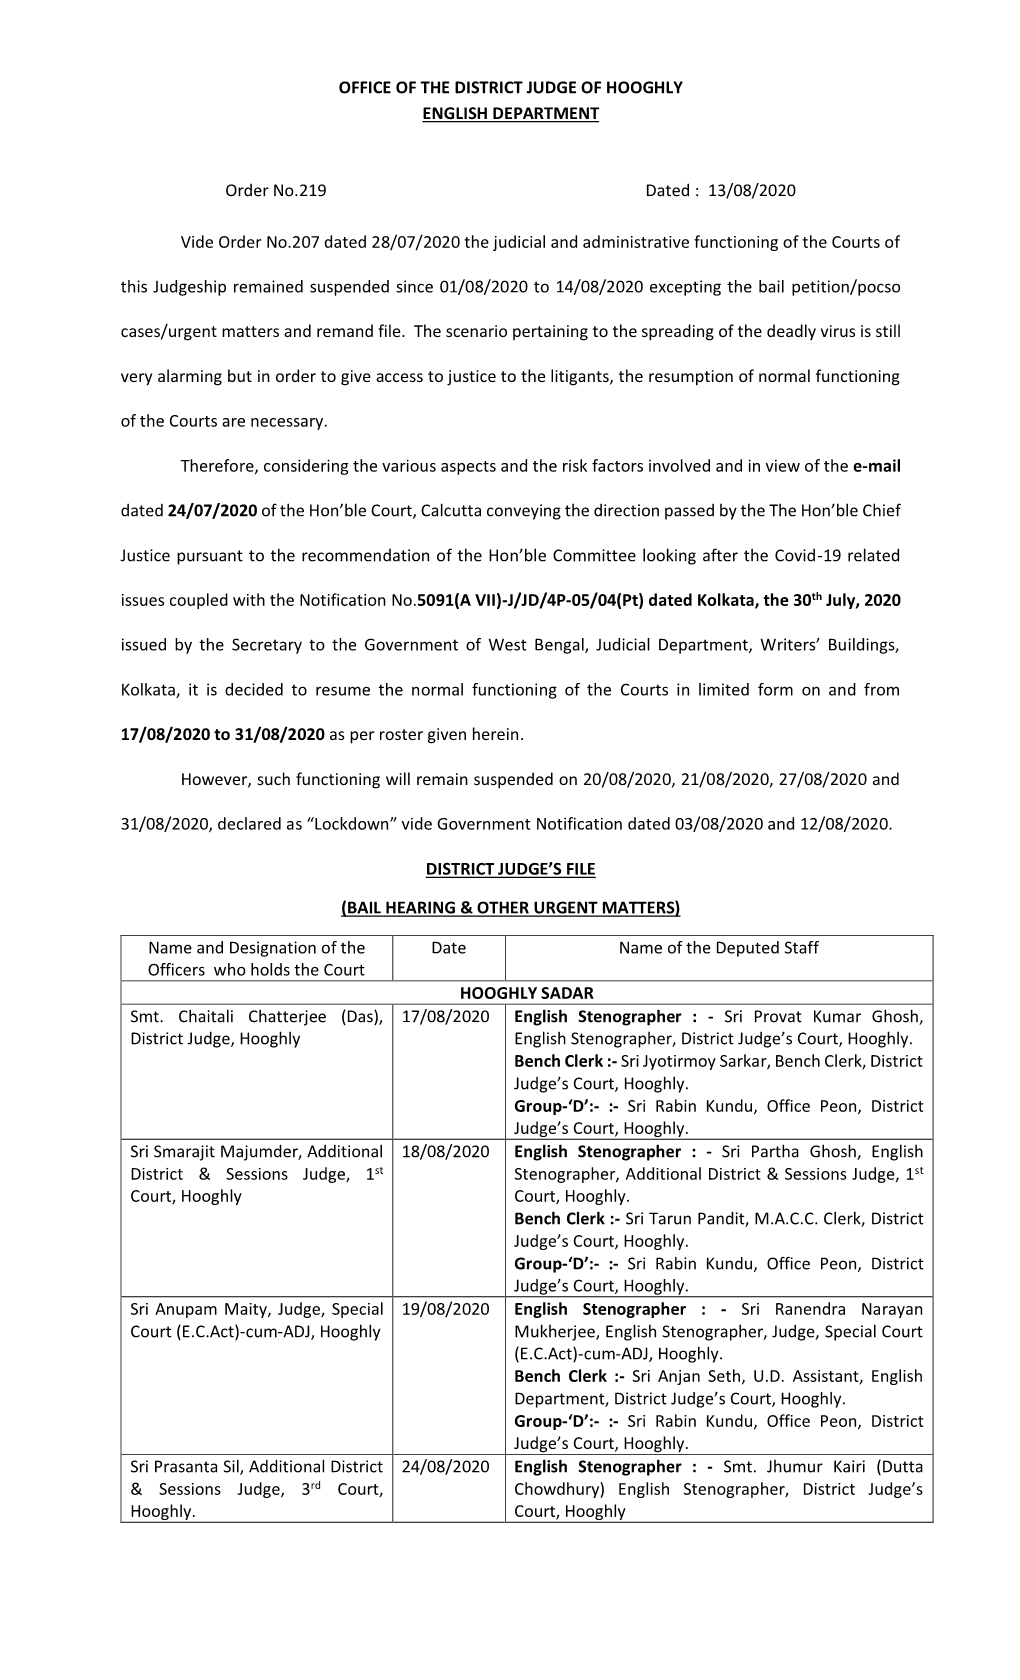 Order No 219 Duty Roster of Judicial Officer from 17.08